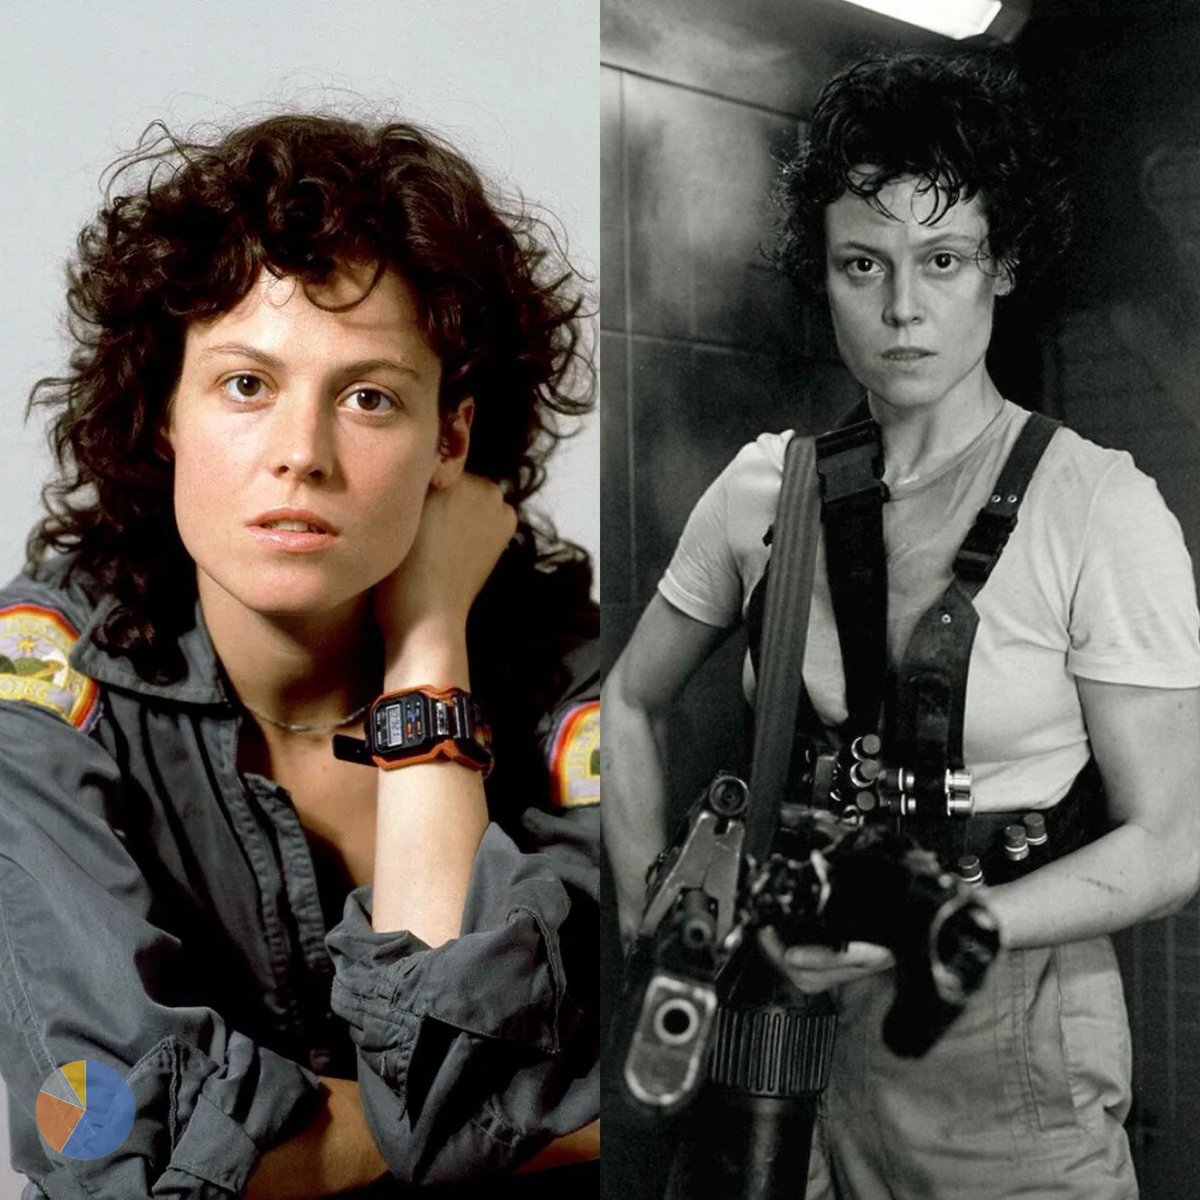 Sigourney Weaver only earned $35,000 for Alien (1979) but got $1,000,000 and a share of the profits for Aliens (1986).